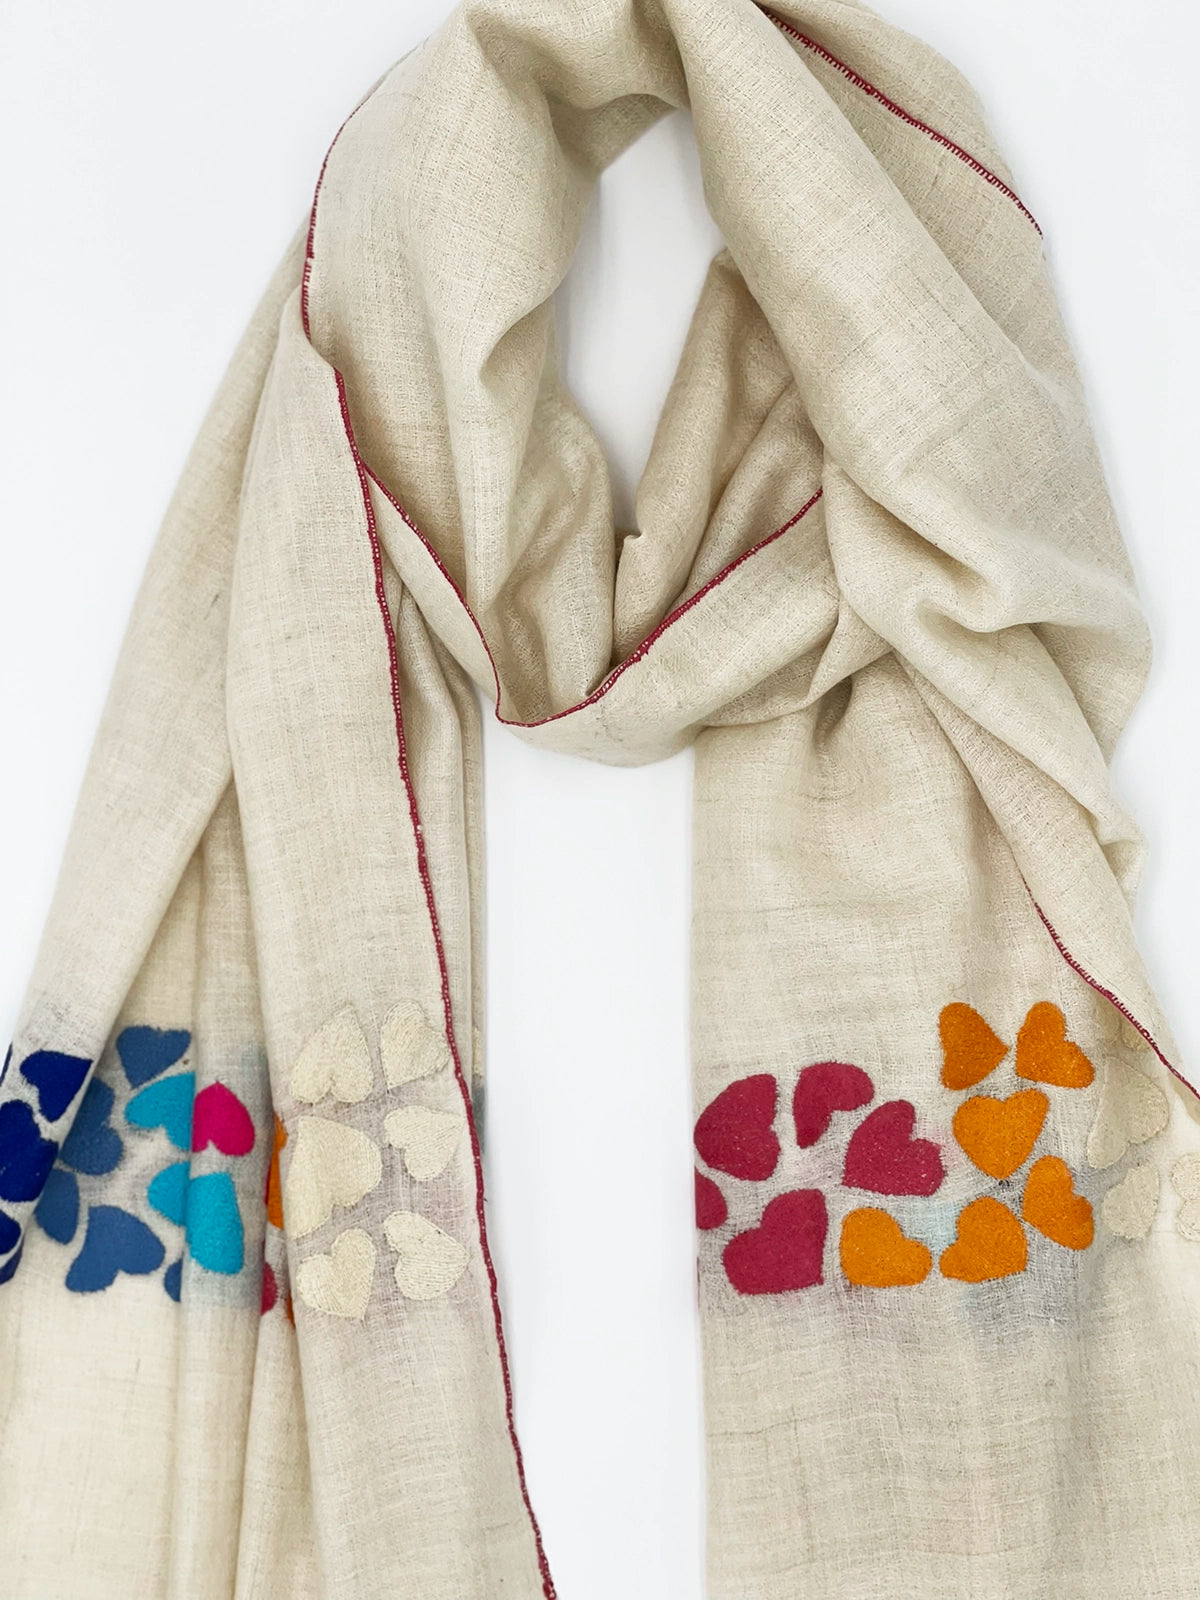 Handwoven 100% Pashmina - HEARTS EMBROIDERY